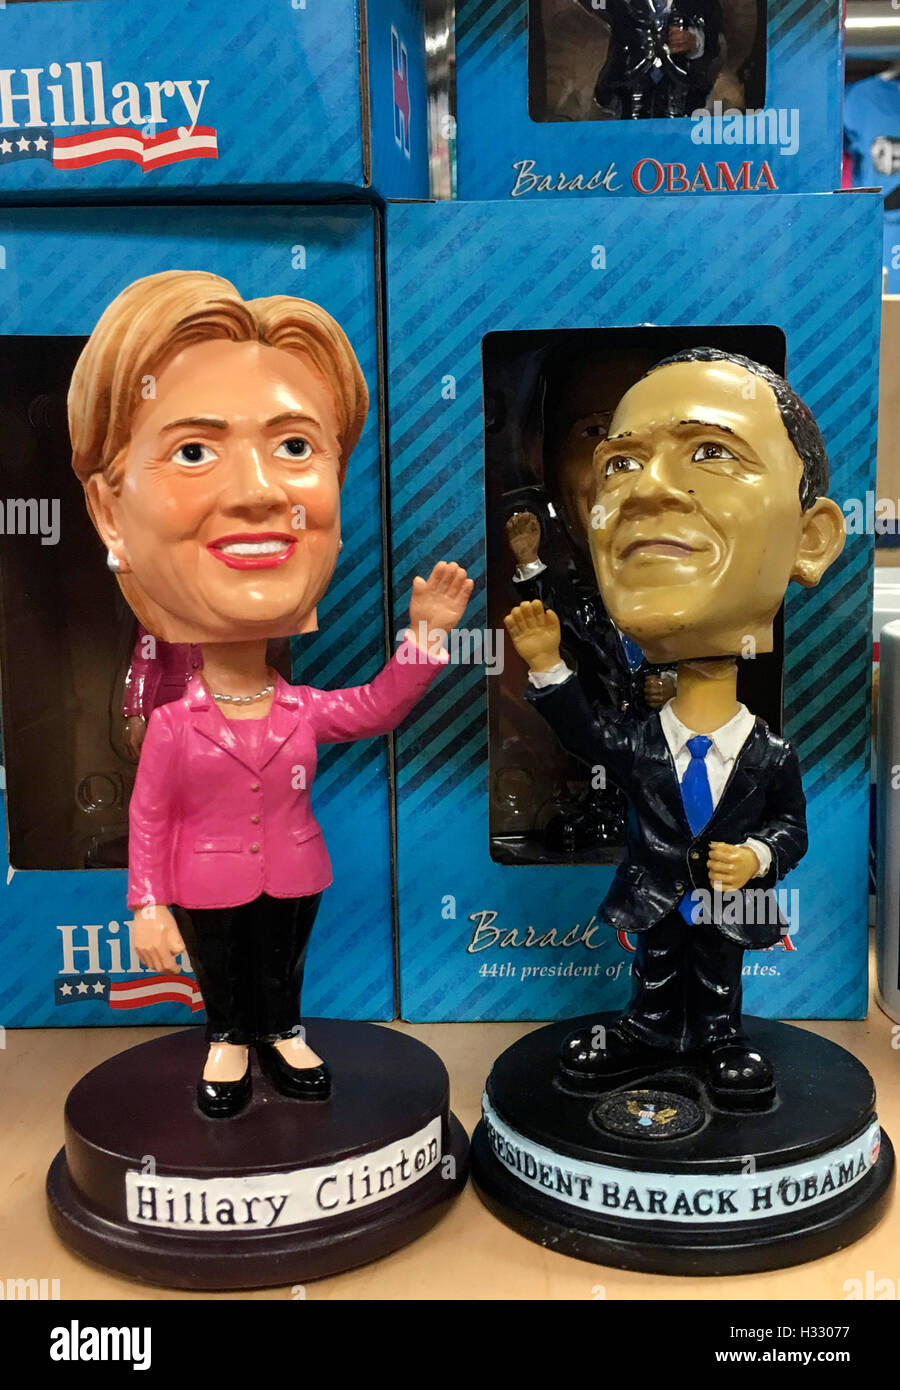 Effigies of Hillary Clinton and Barak Obama on different items during the american presidential campaign, USA Stock Photo